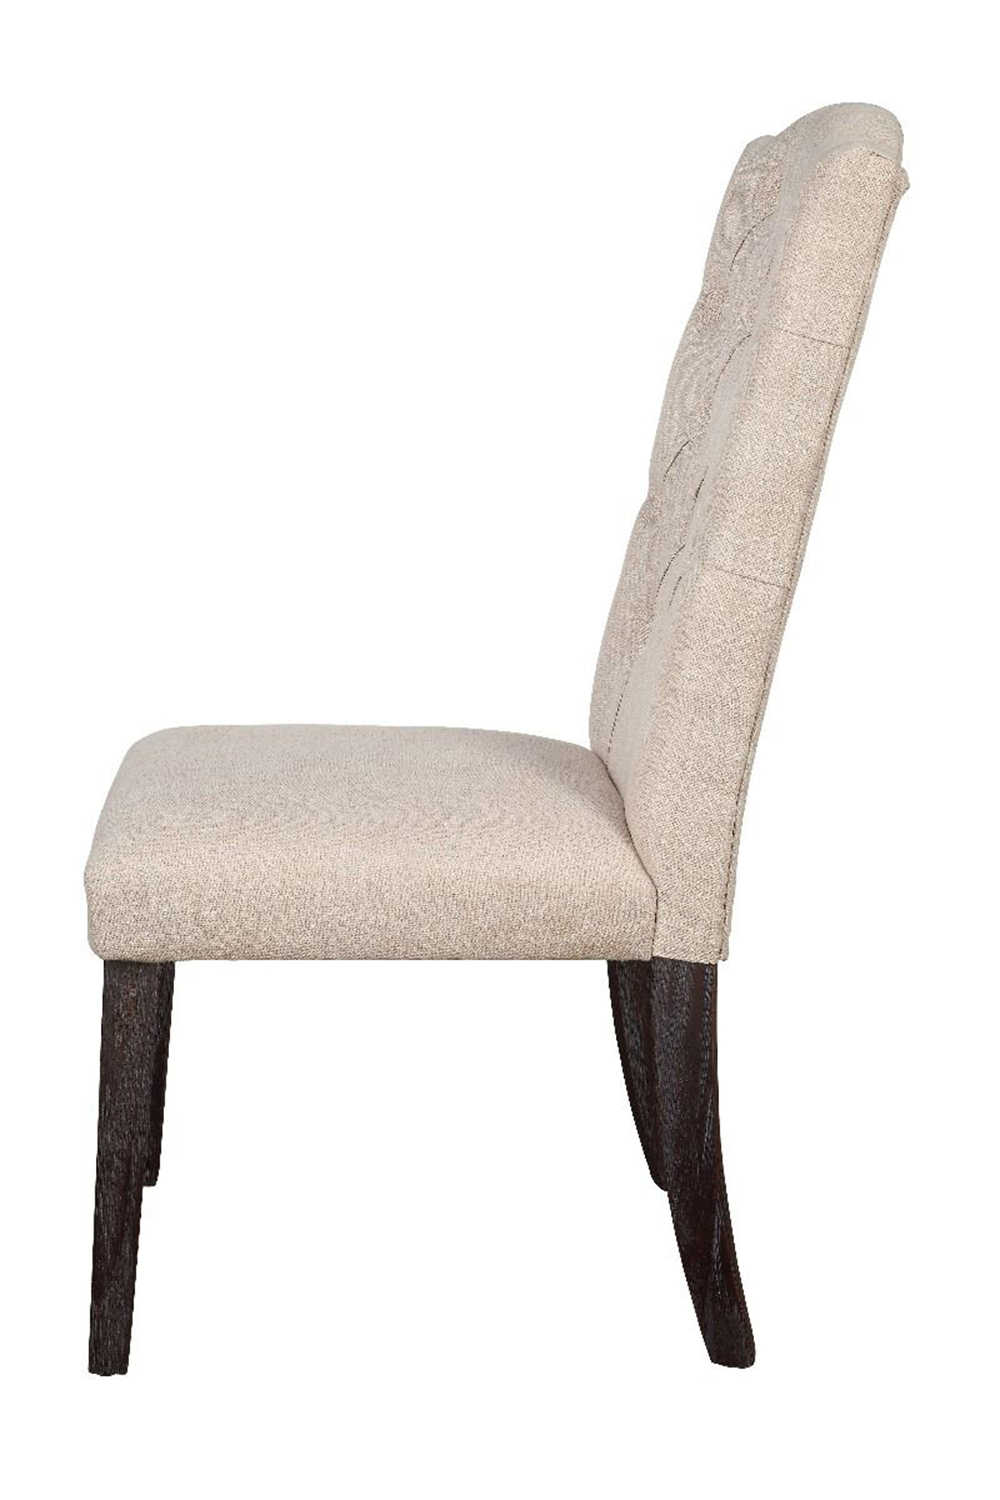 ACME Gerardo Linen Upholstered Dining Chair Set of 2, with High Backrest, and Wooden Legs, for Restaurant, Cafe, Tavern, Office, Living Room - Beige